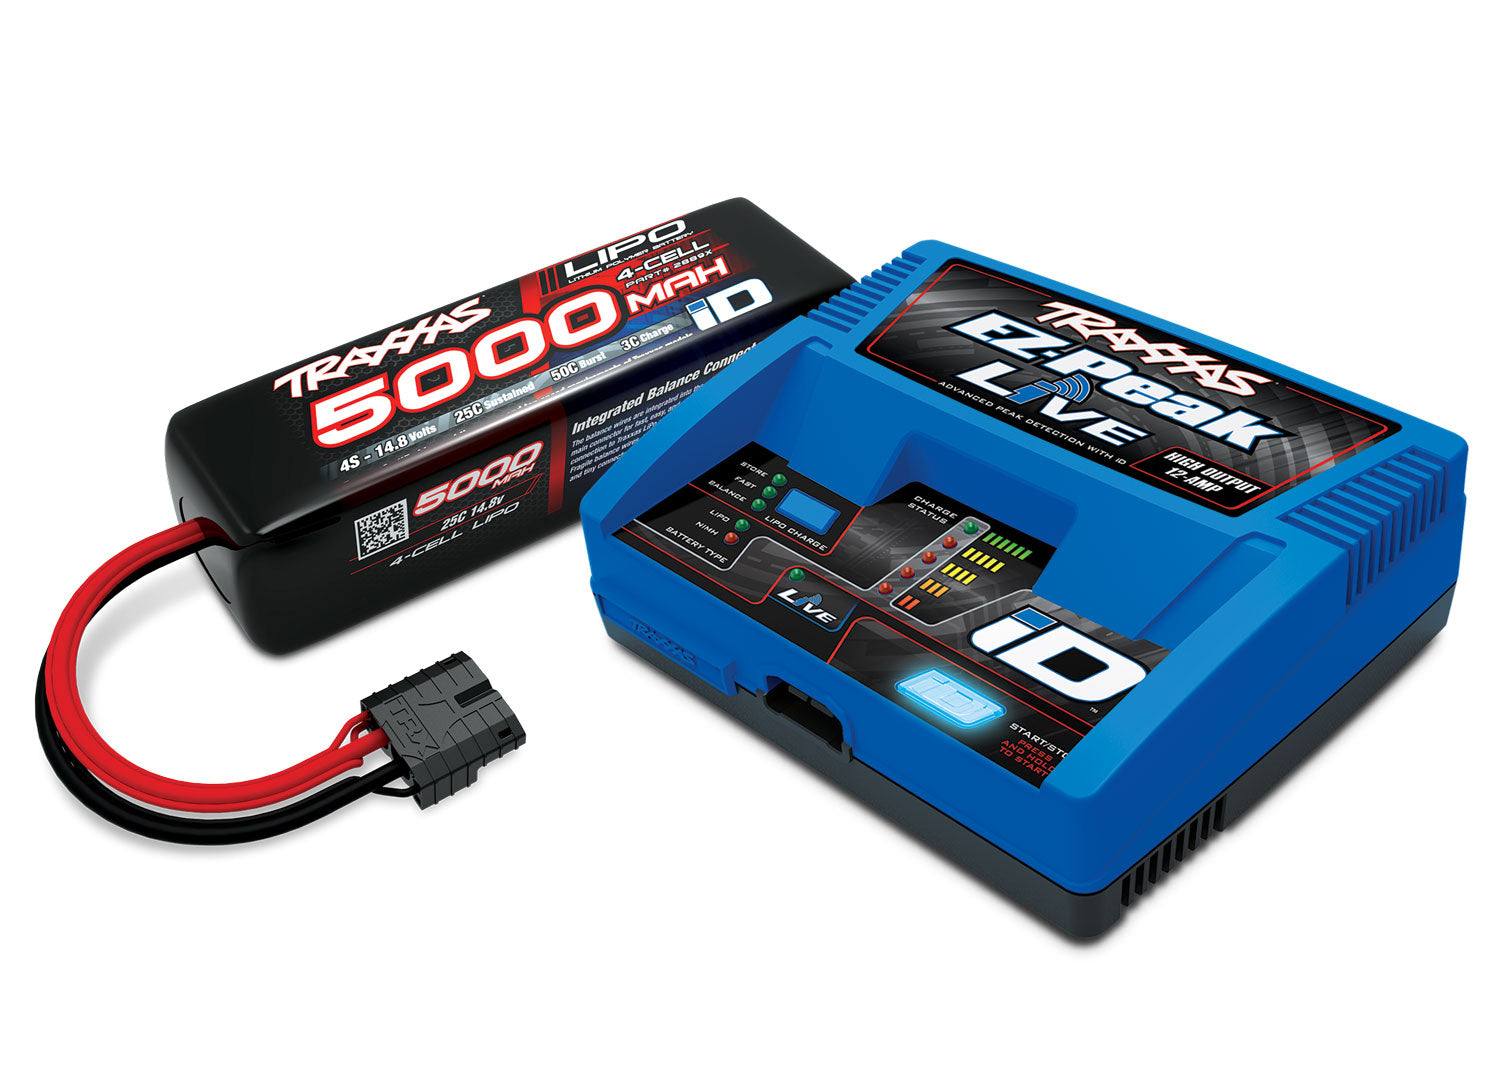 Traxxas 2998 4S LiPO 25C 6700MAH Battery/Charger Completer Kit